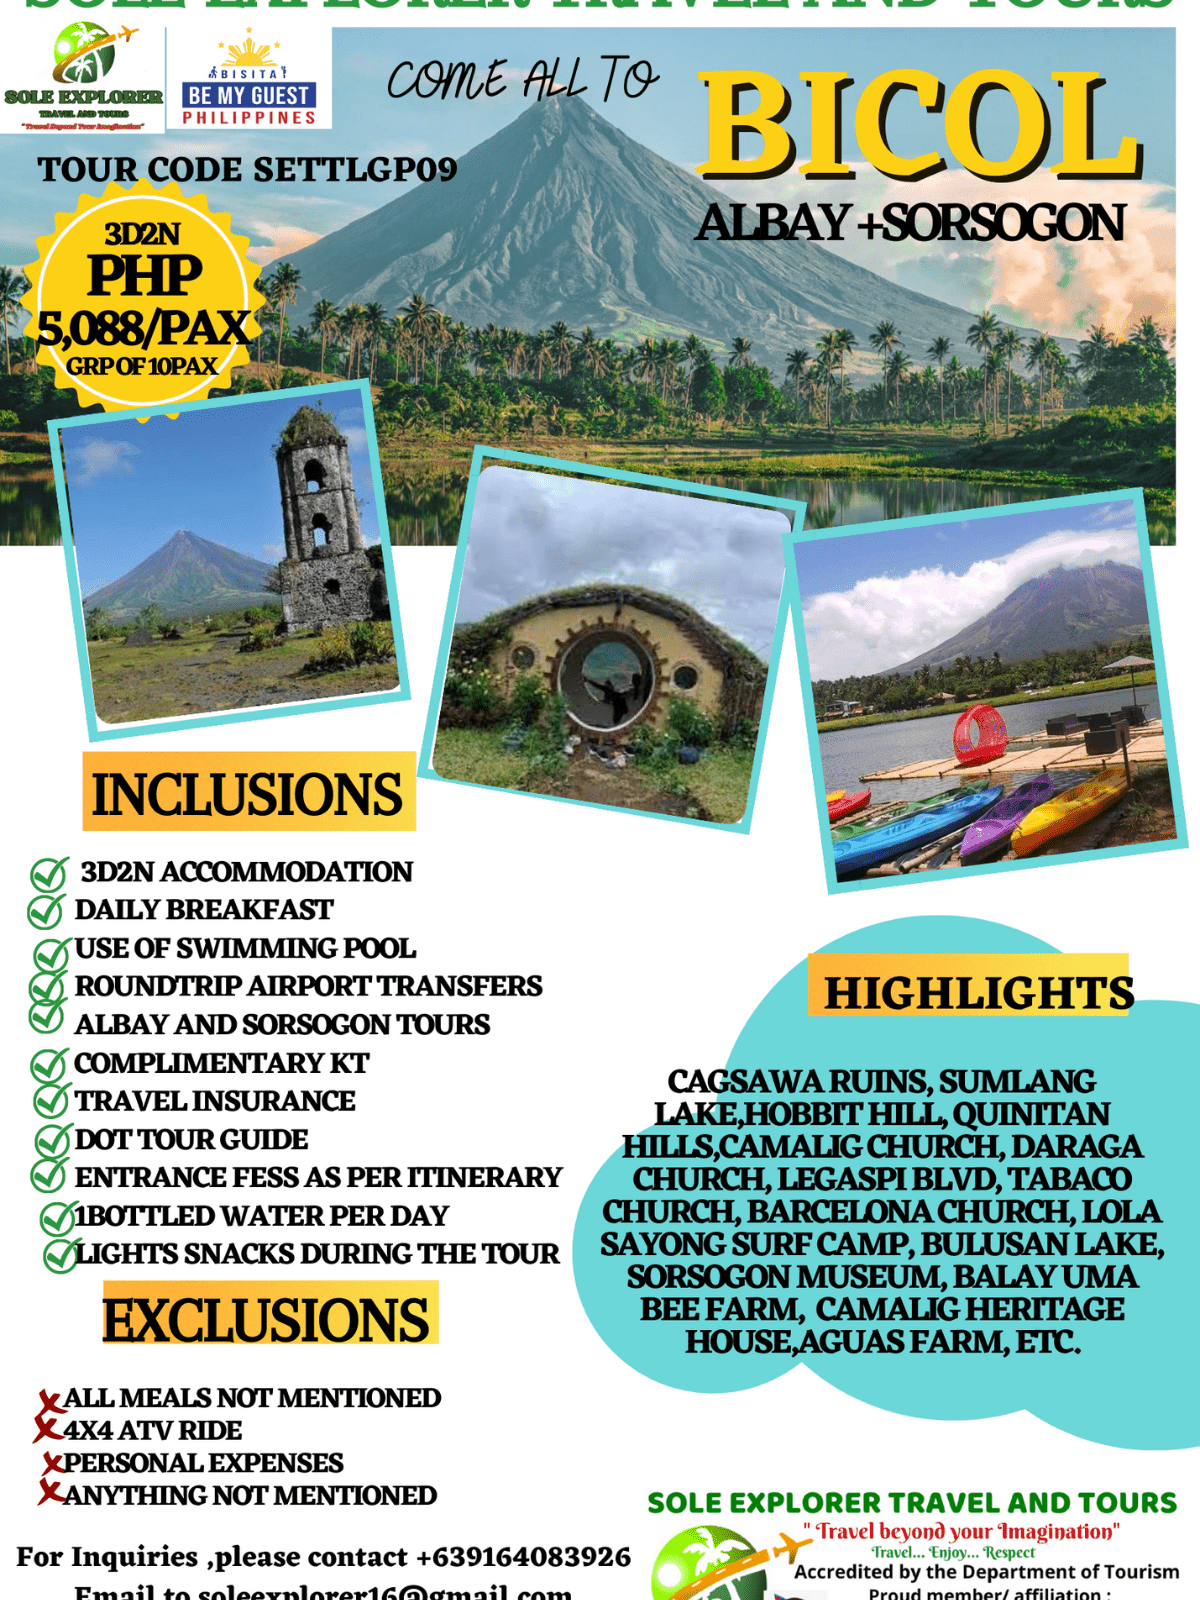 BICOL_Sole Explorer Travel and Tours2-1